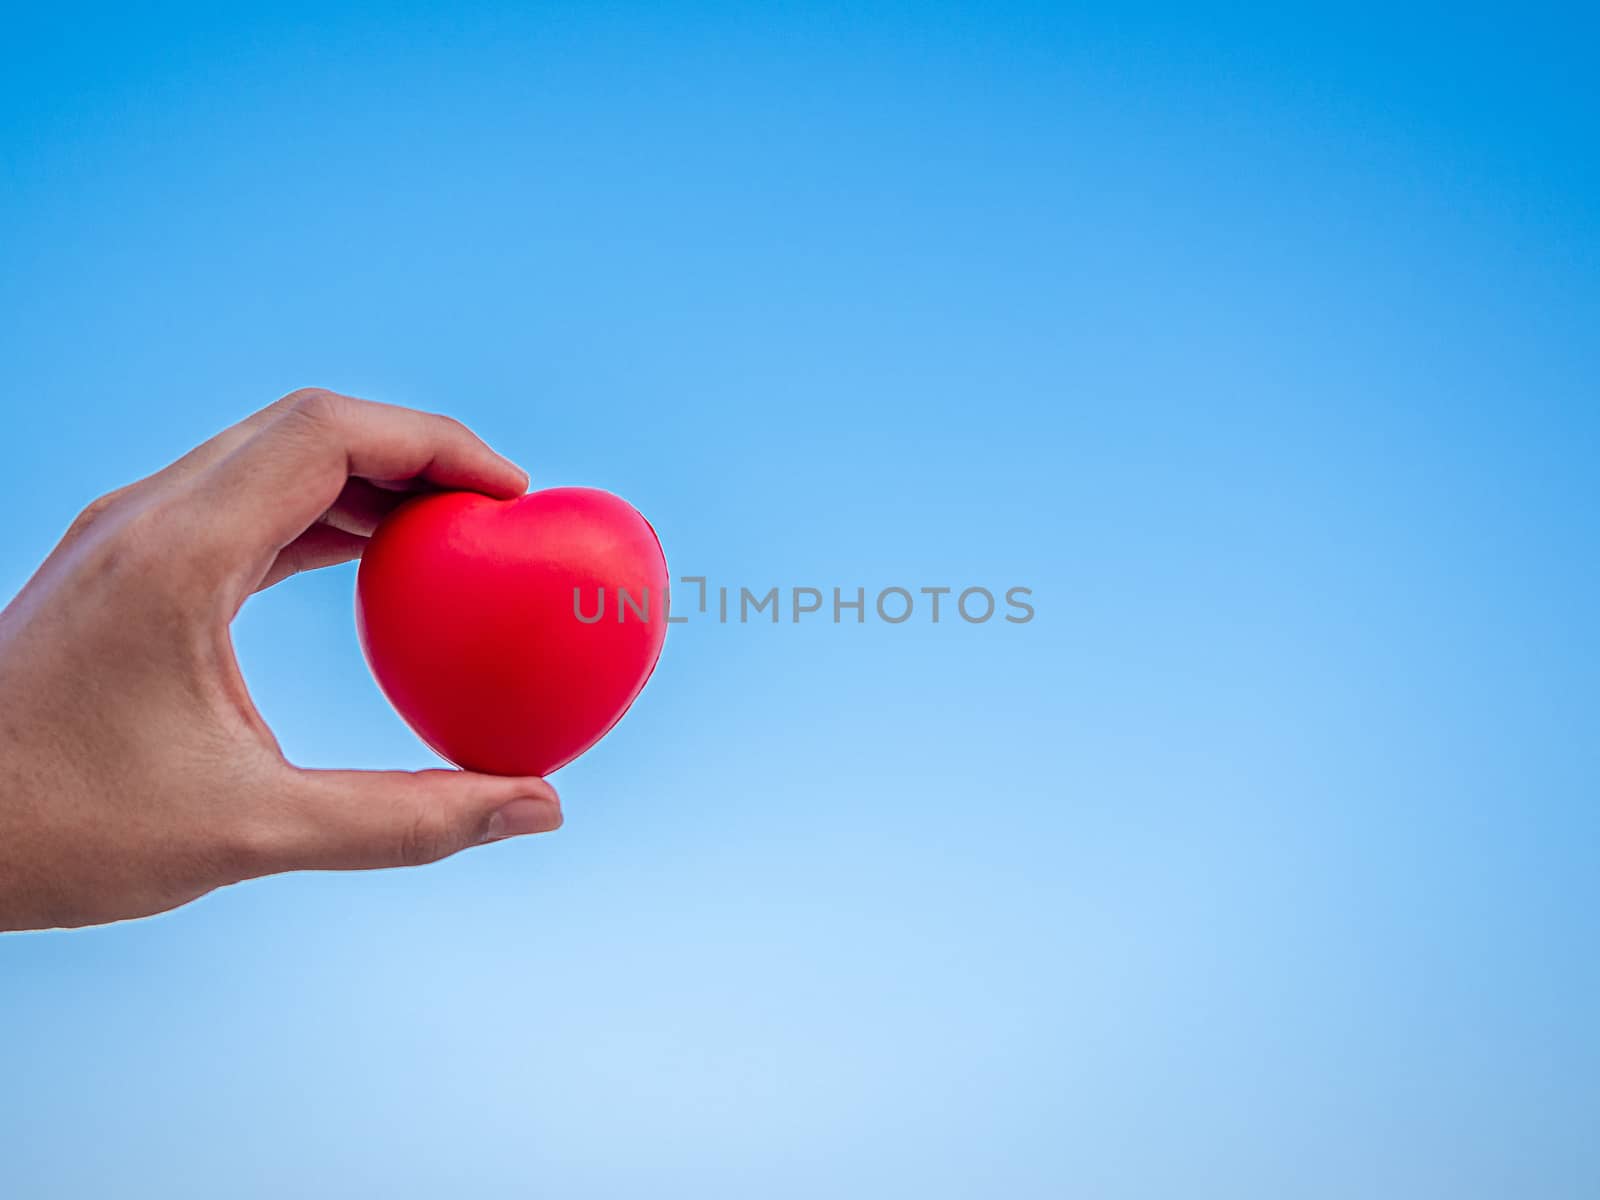 Red heart in hand on blue sky background with copy space, love, peace and giving concept.